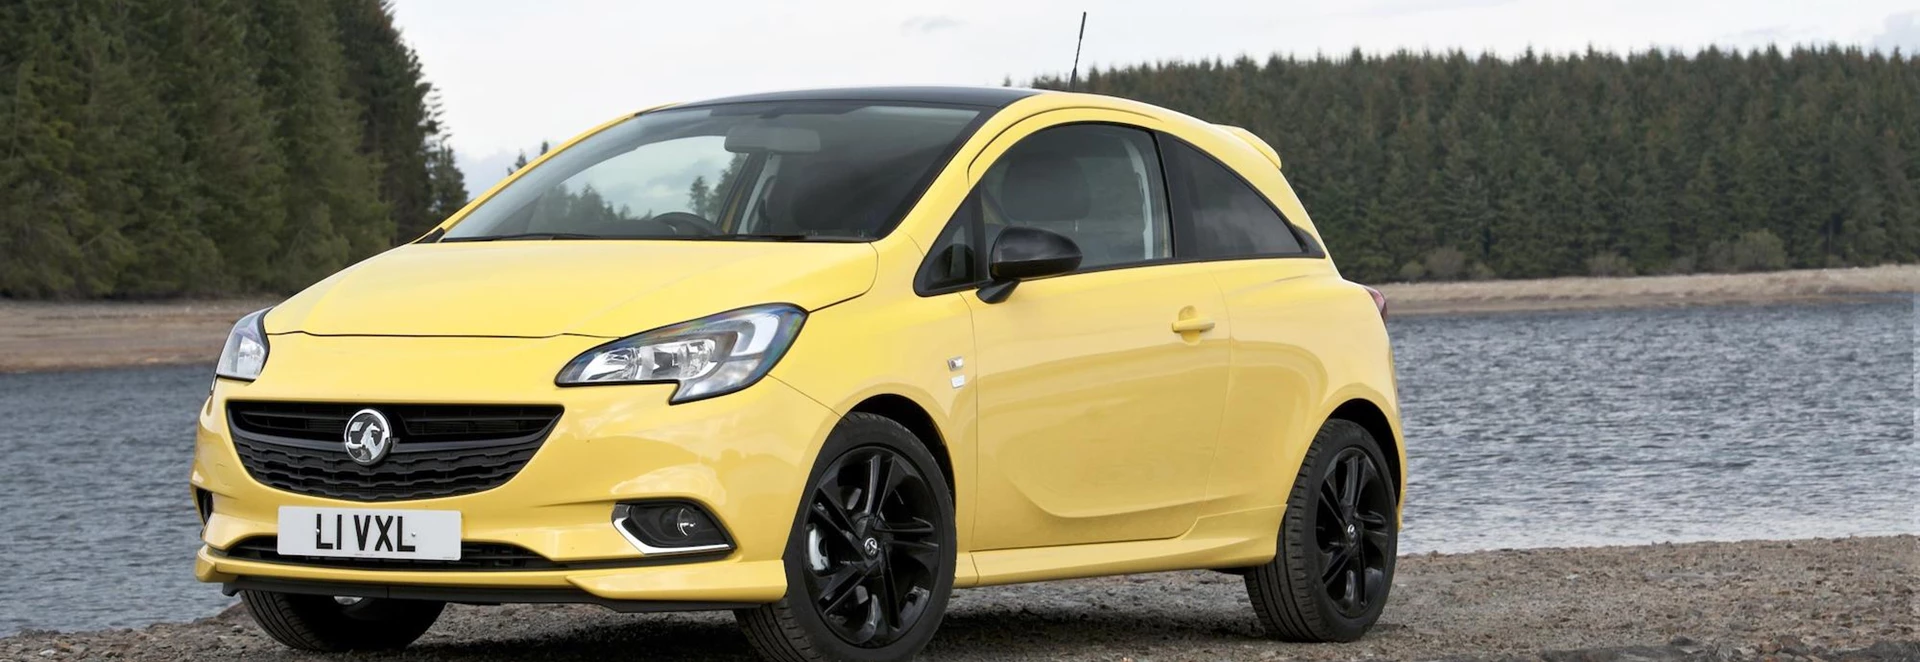 Fully electric Vauxhall Corsa confirmed for 2019